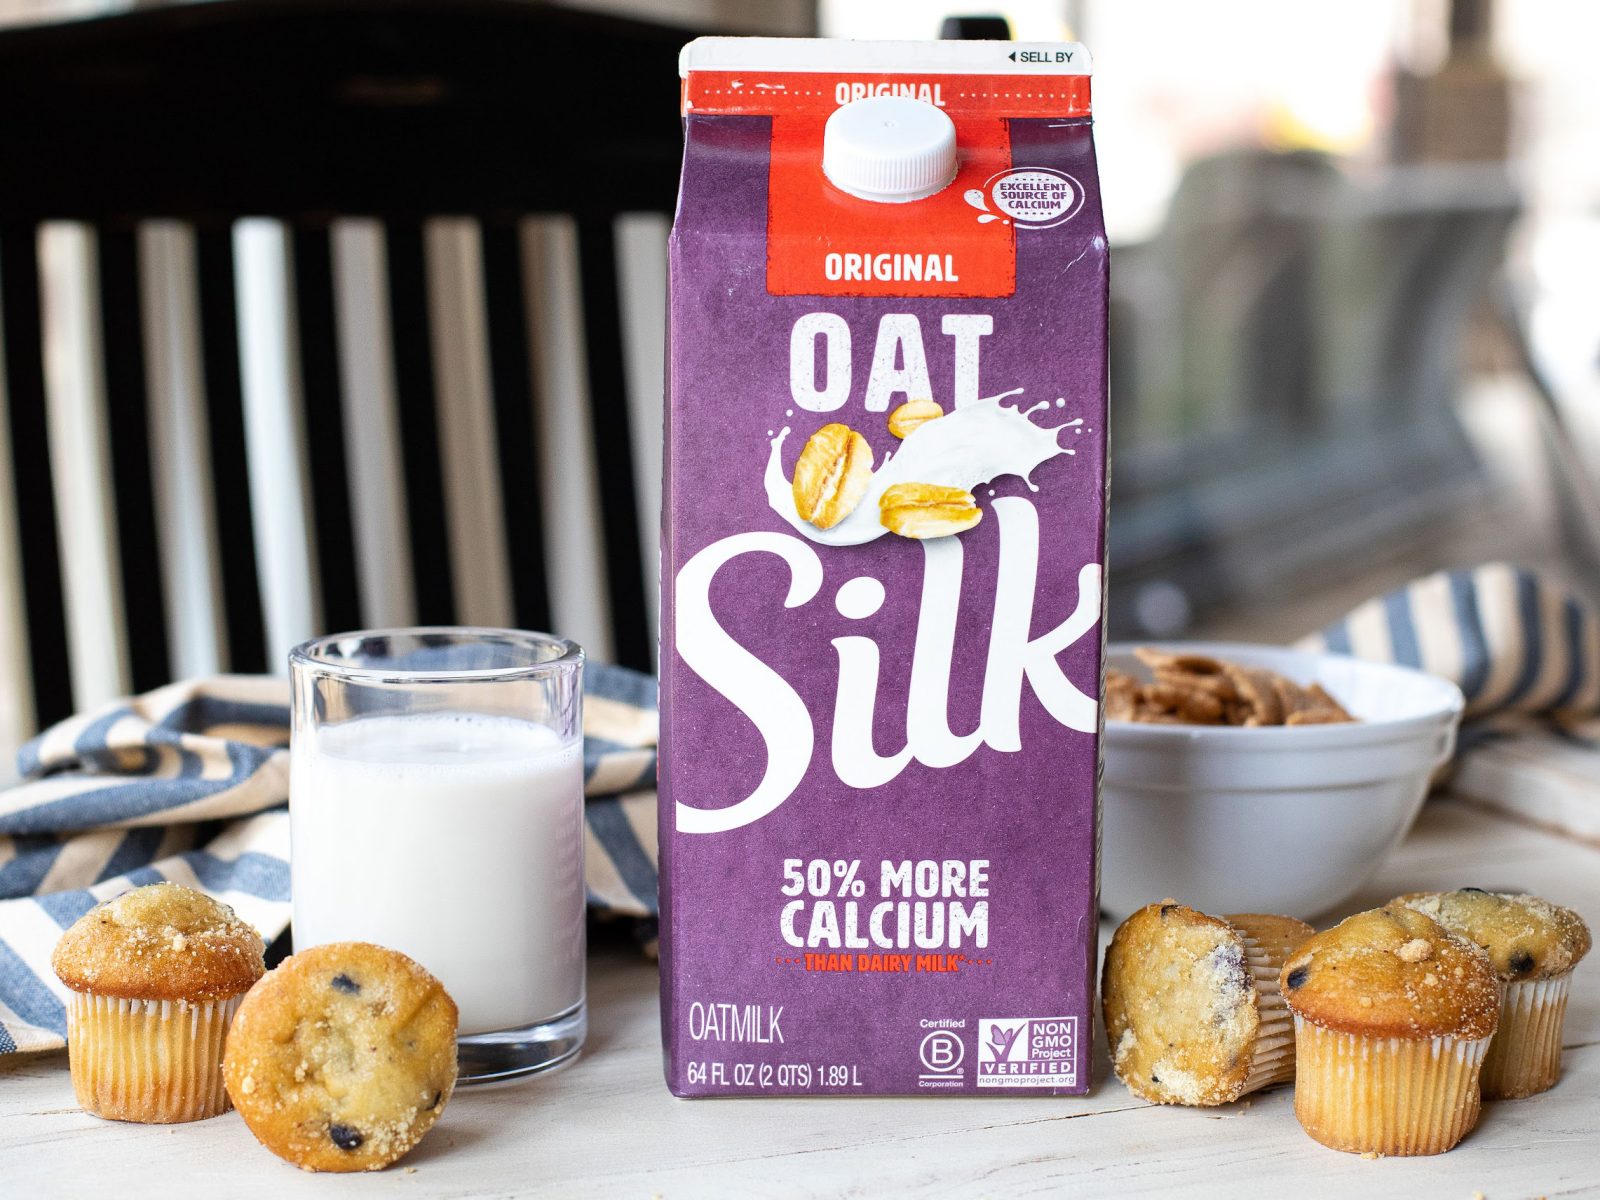 Score Delicious Silk Oatmilk For Just 25¢ At Publix